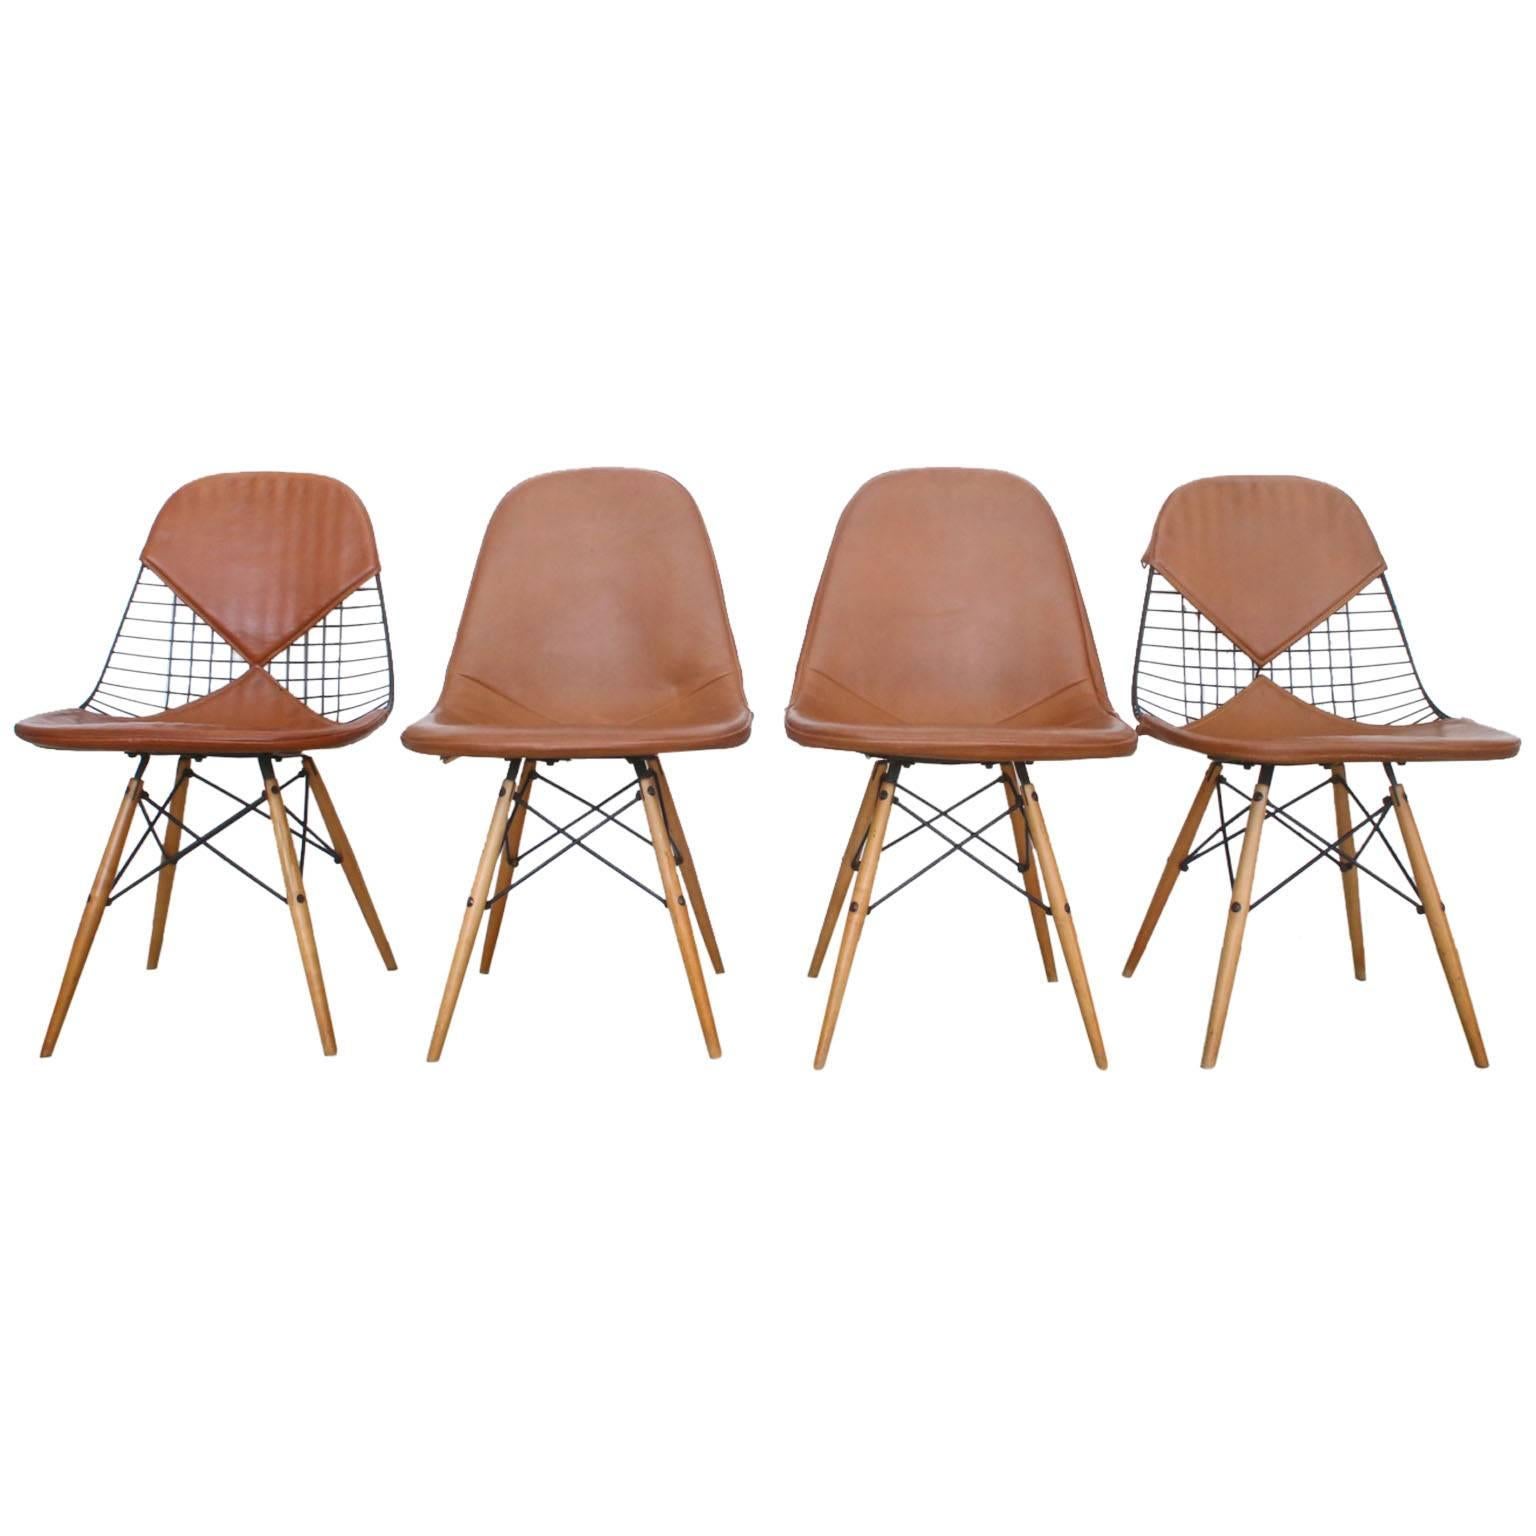 Set of Four Early Charles Eames Dowel Leg Chairs